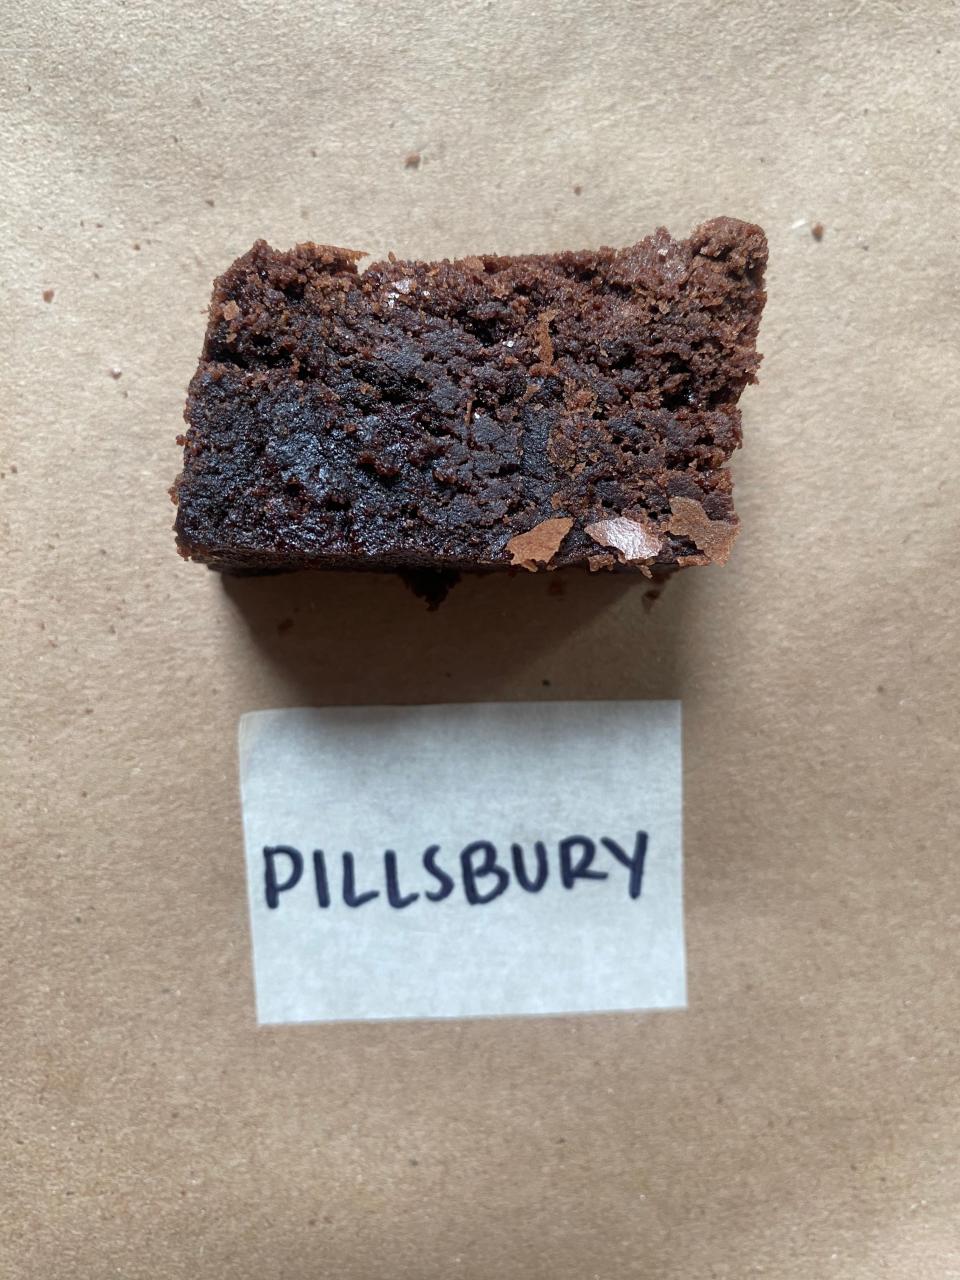 A close-up of a chocolate brownie with a 